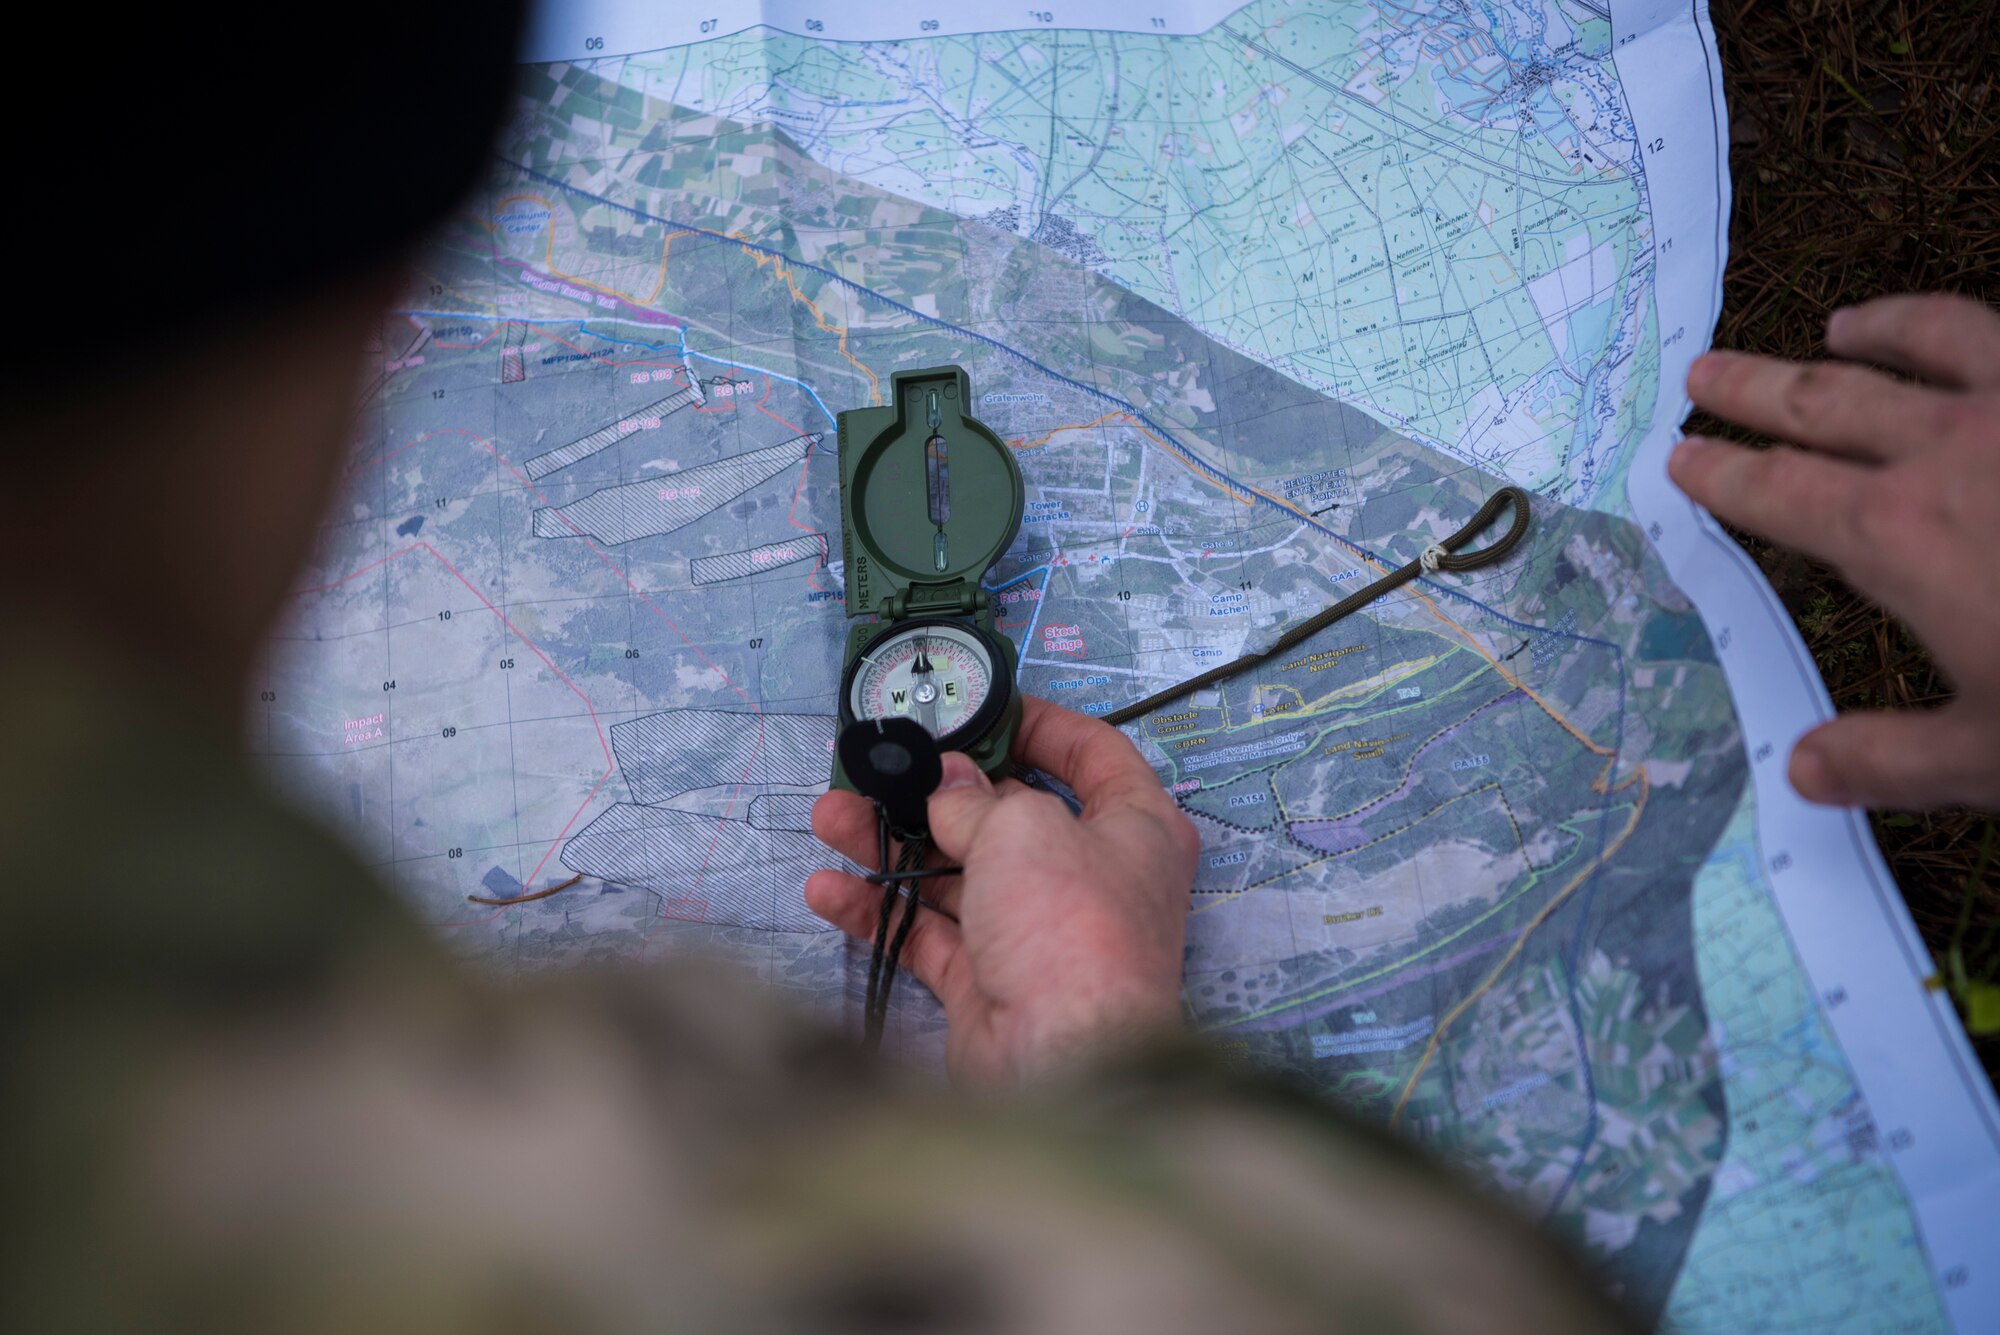 U.S. Air Force Staff Sgt. Ryan Silva, 435th Security Forces Squadron contingency response member, holds a compass against a map while participating in a Survival Evasion Resistance Escape navigation course during exercise Agile Wolf 21-01.